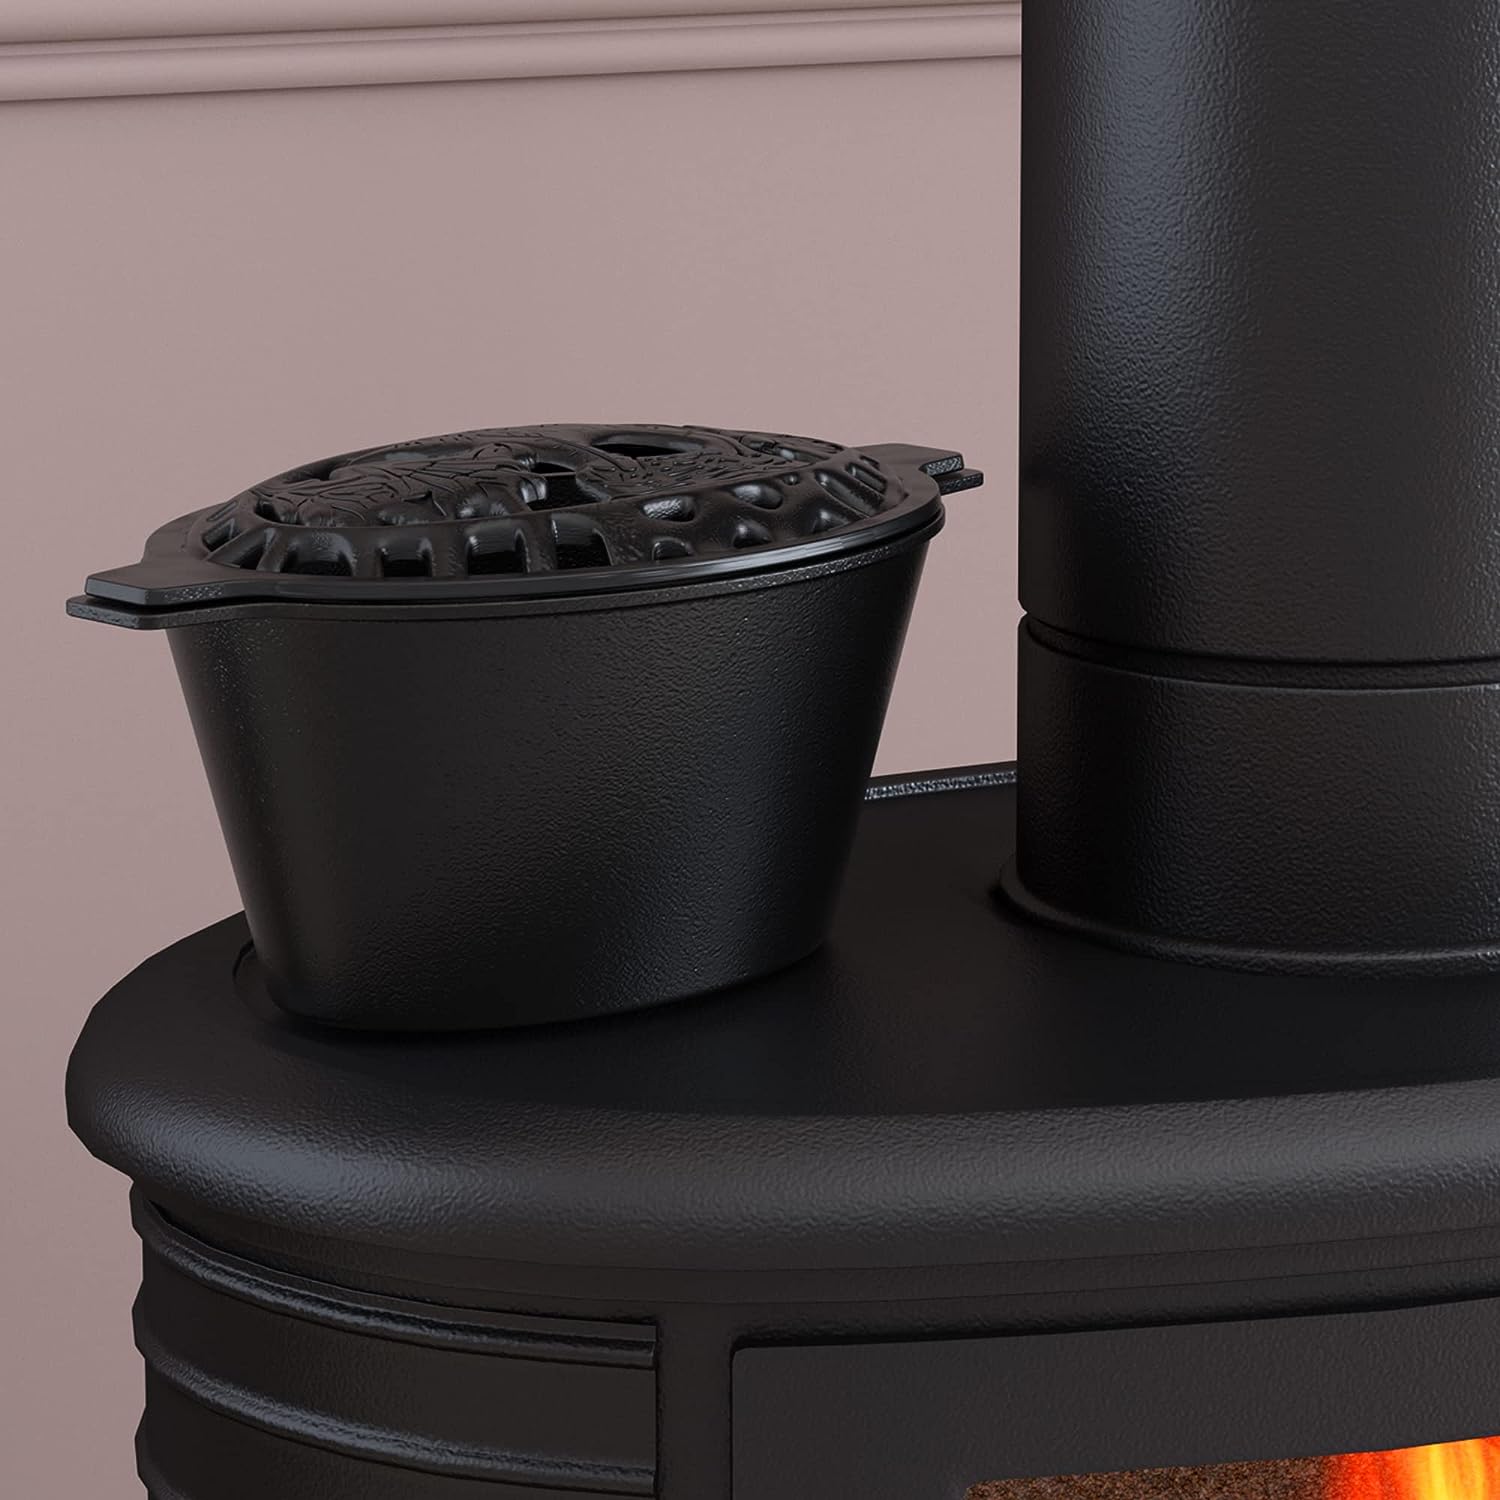 Cast Iron Wood Stove Steamer 